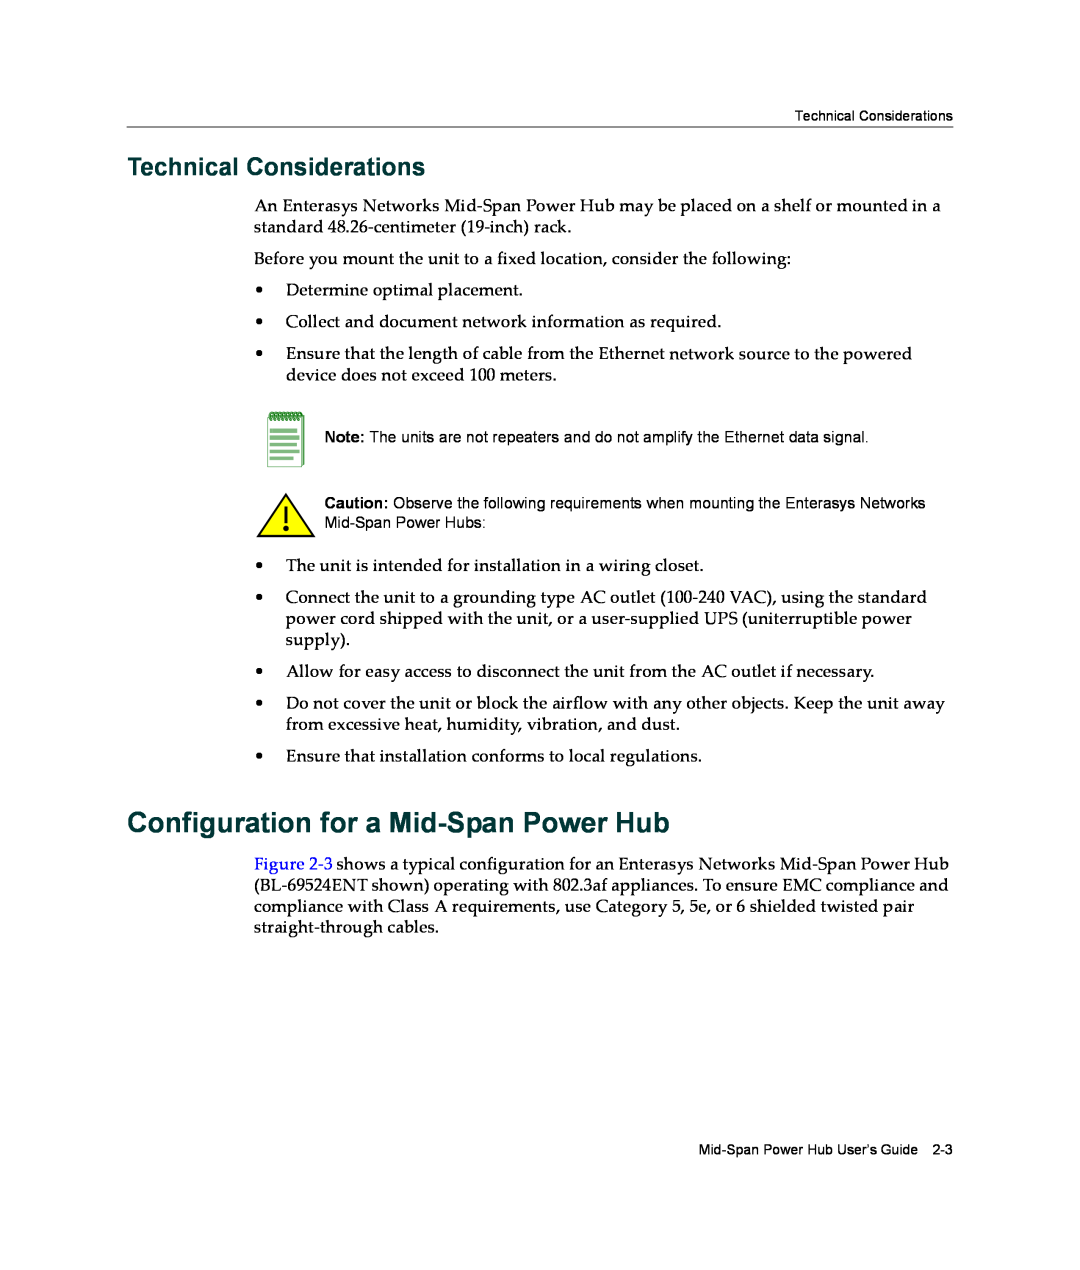 Enterasys Networks BL-6000ENT manual Configuration for a Mid-Span Power Hub, Technical Considerations 